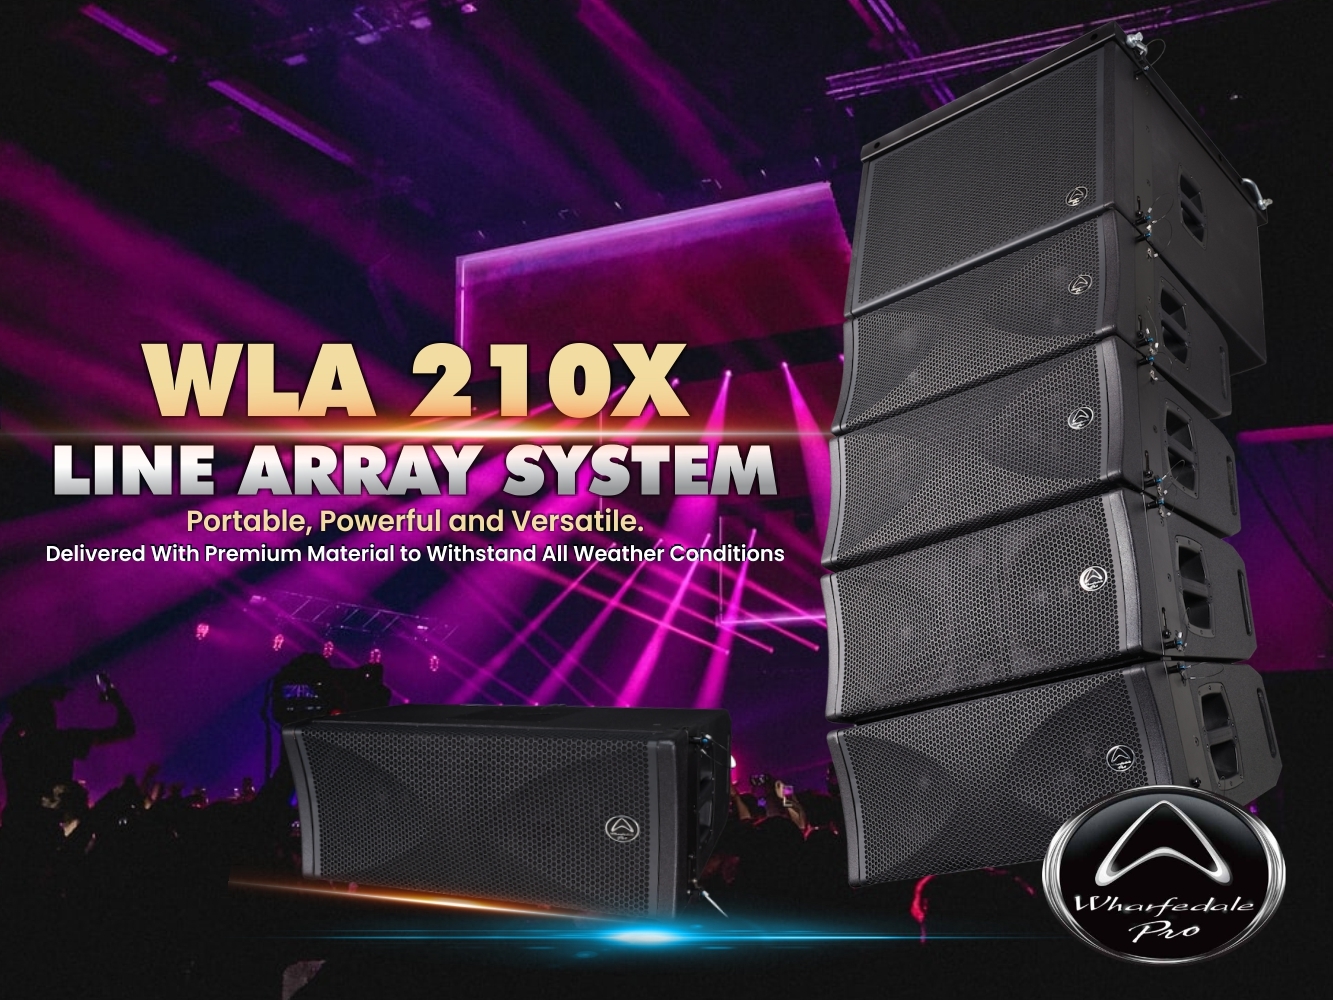 array for portability and convienience - wla 210x line array speakers